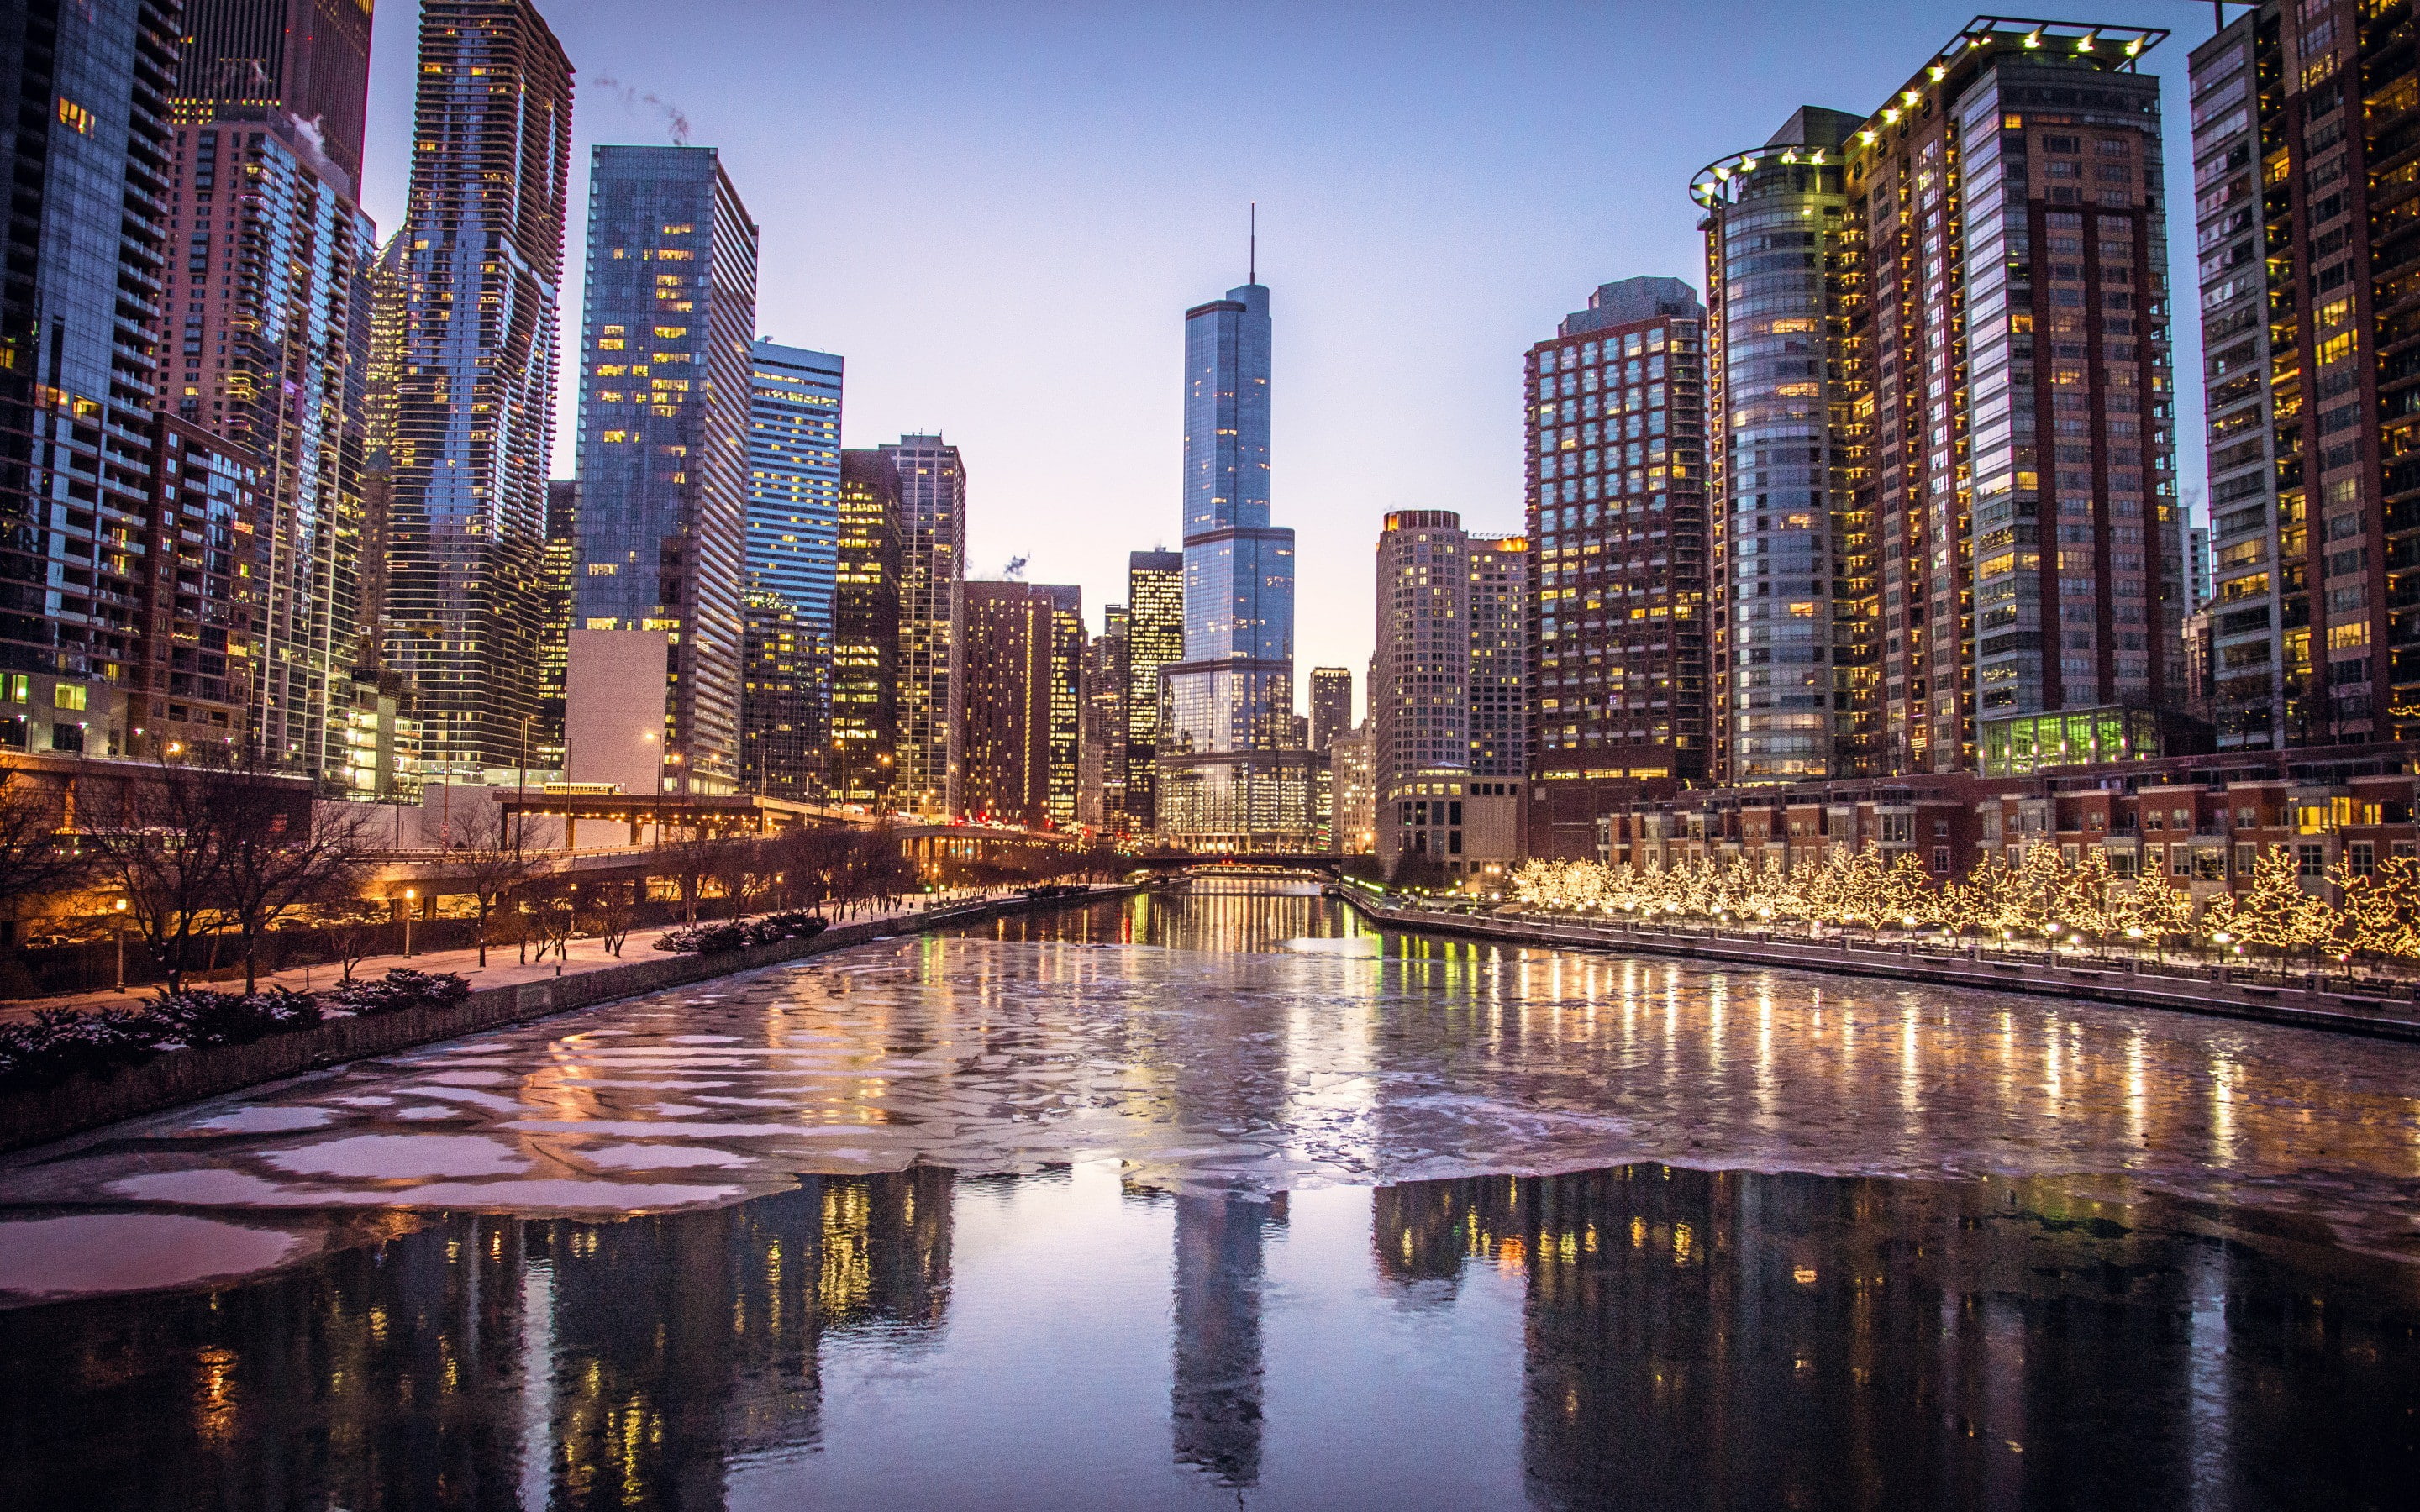 Chicago evening lights, city buildings, Illinois, the city, the river